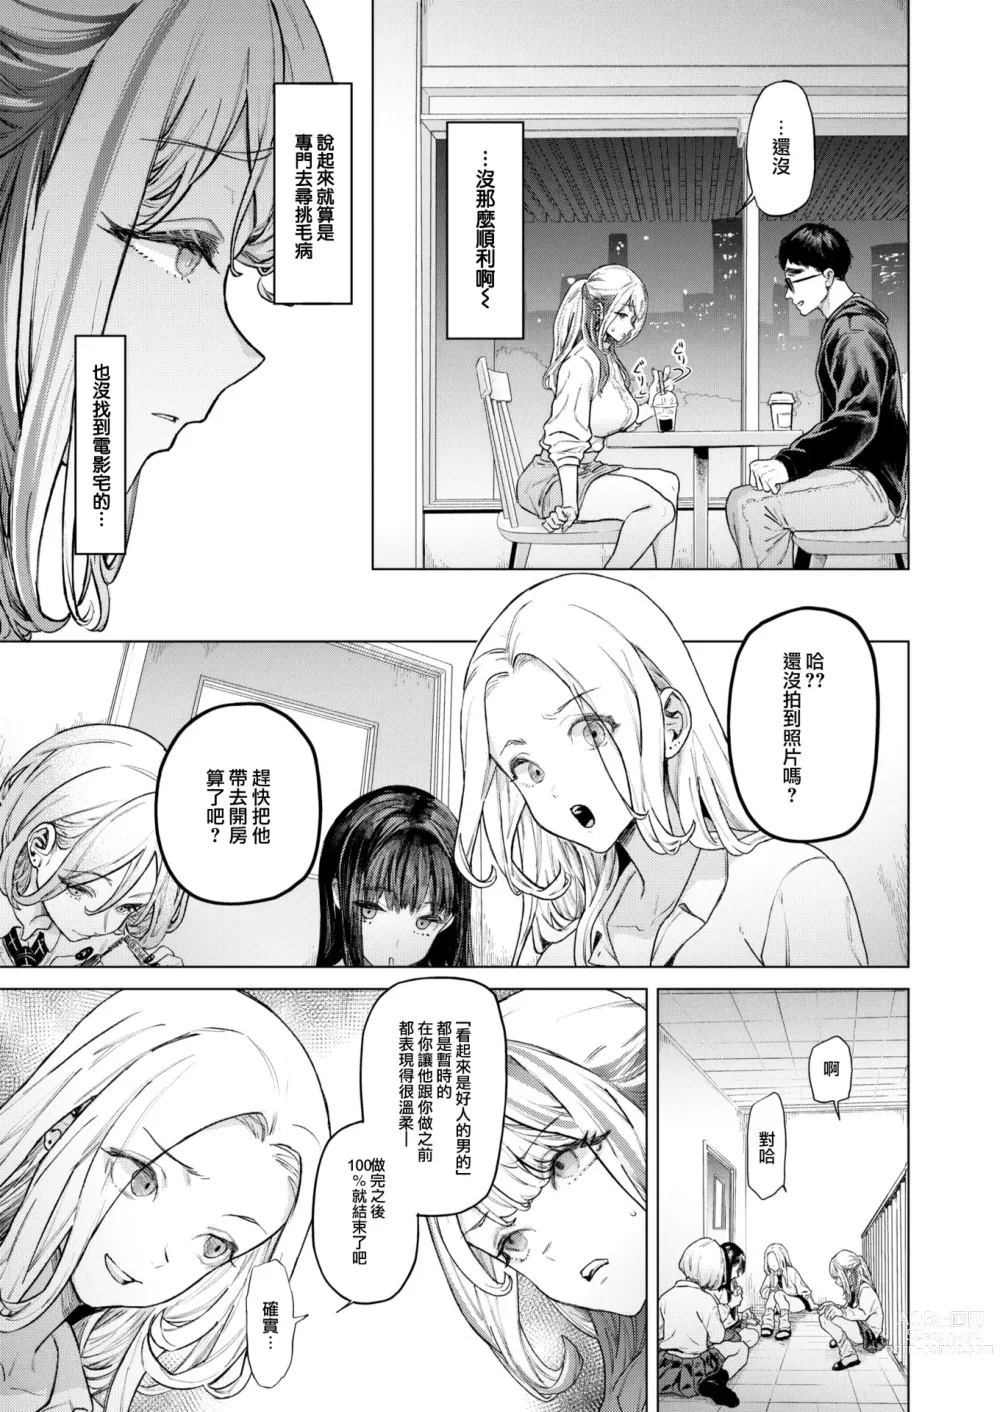 Page 11 of doujinshi movie friend (decensored)